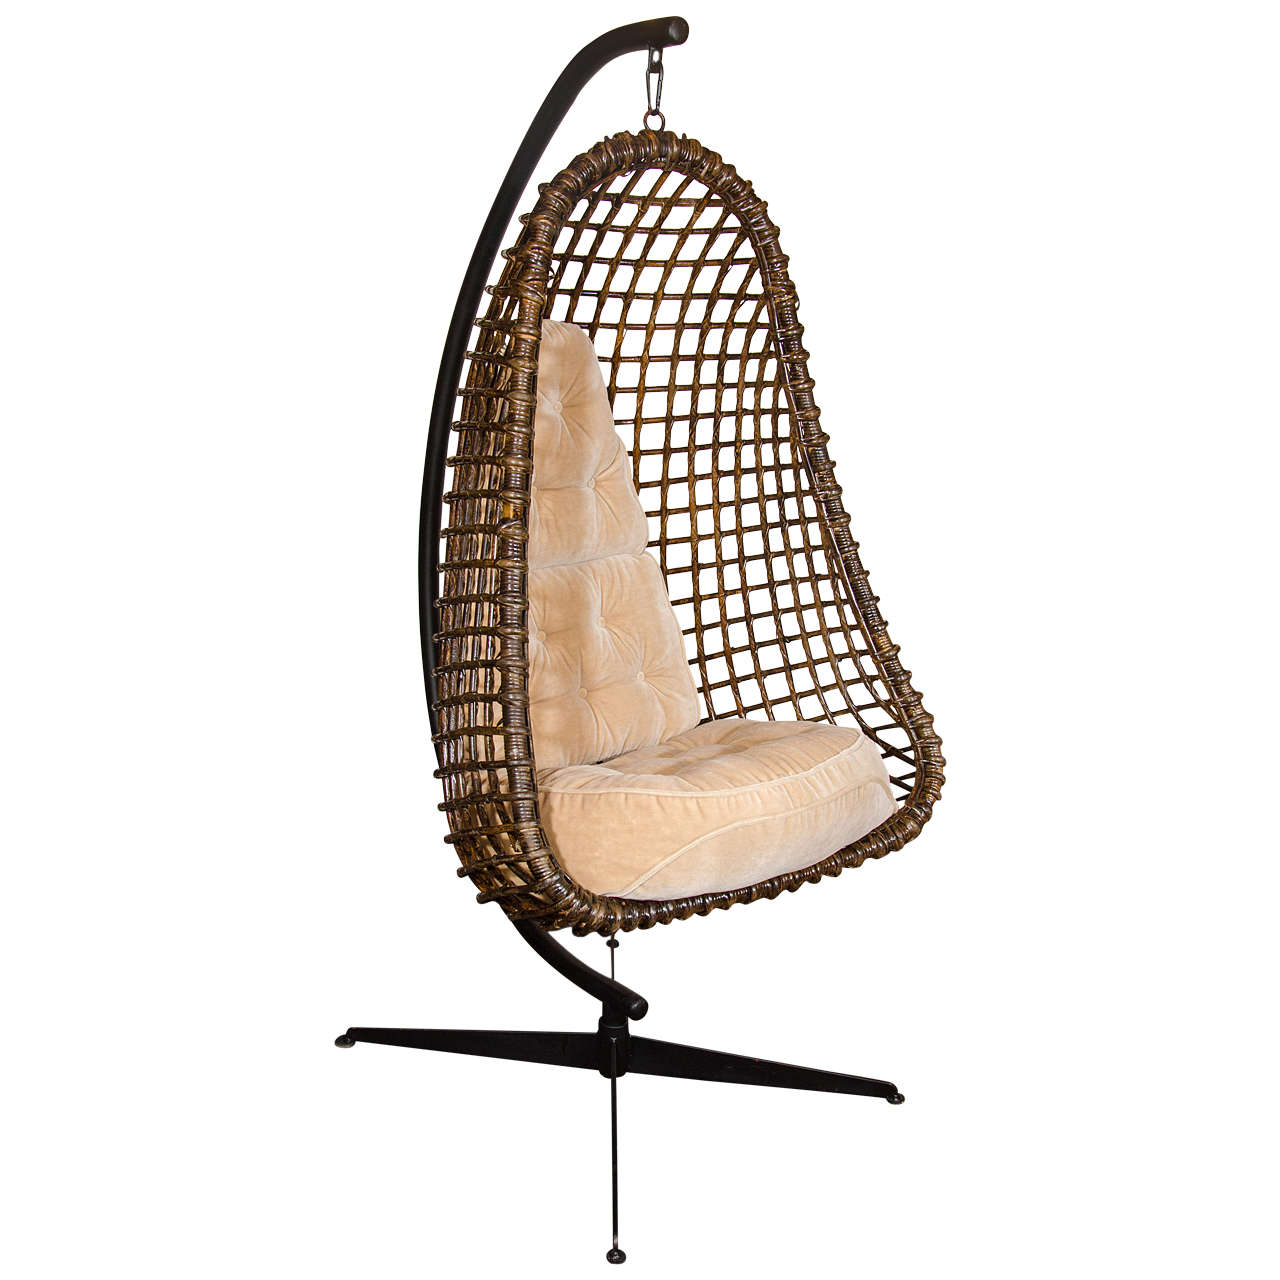 Rare Outstanding Mid Century Modern Hanging Cocoon Chair At 1stdibs